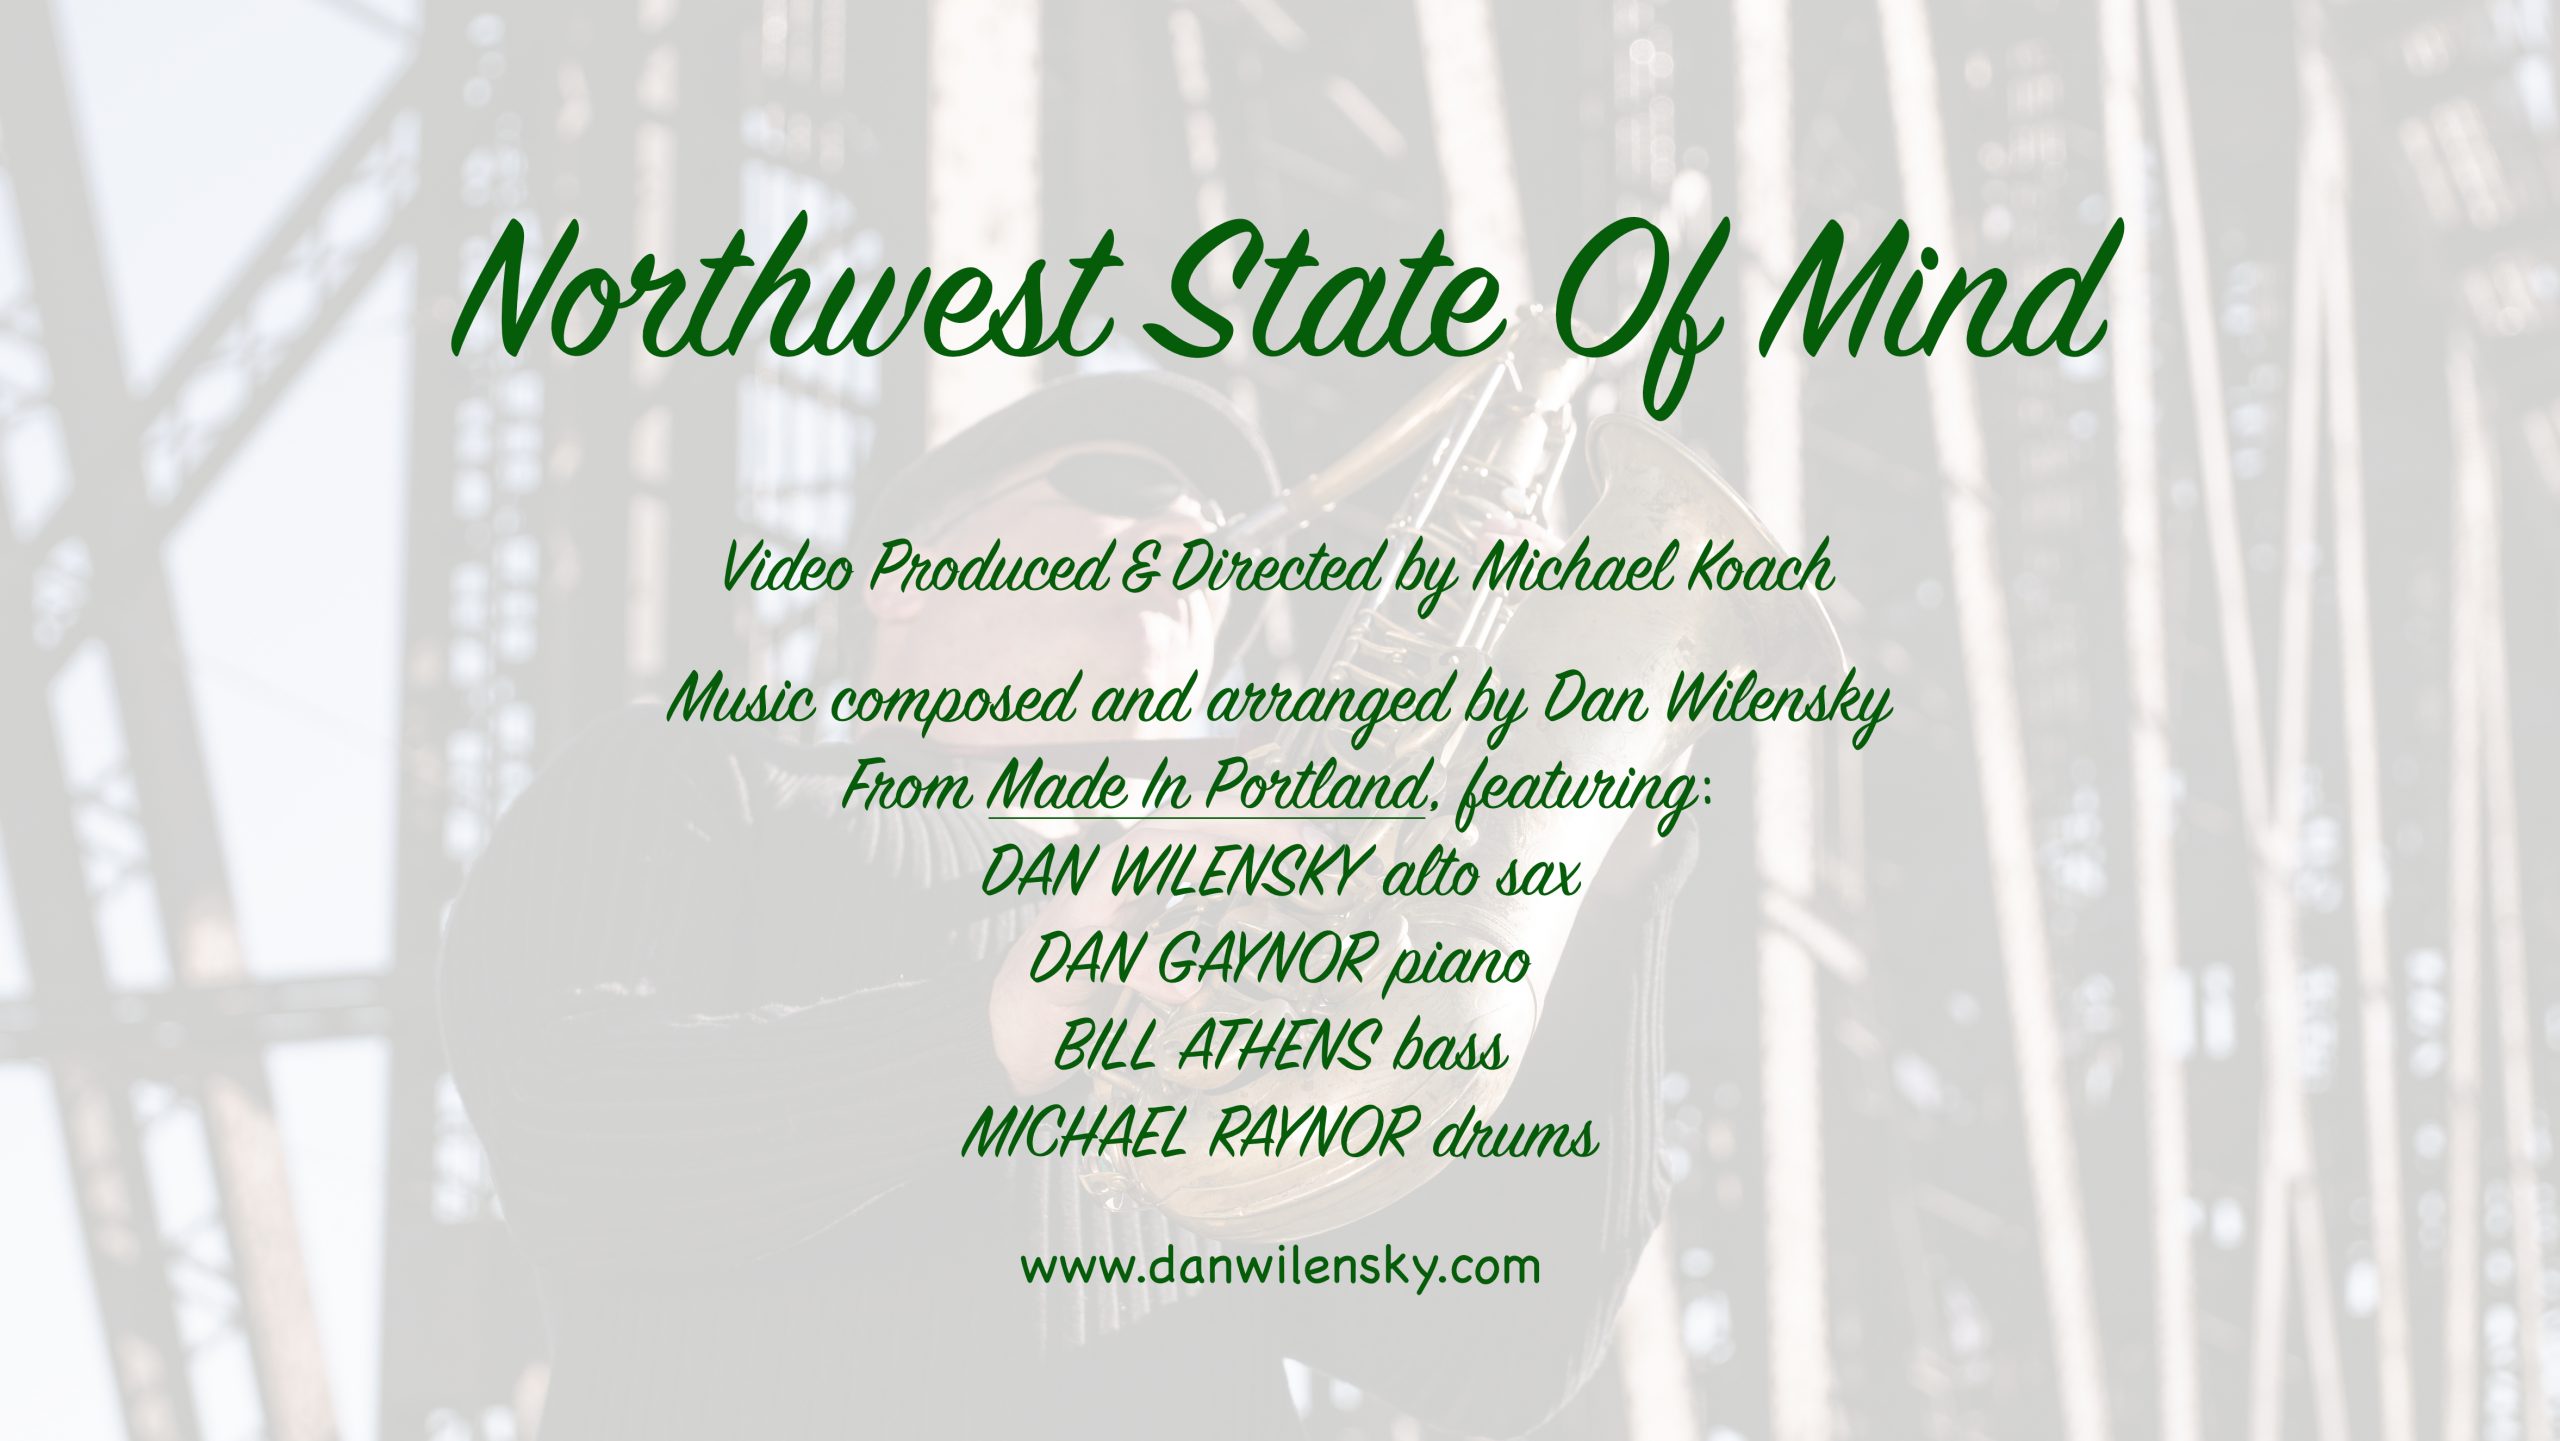 A poster for the movie northwest state of mind.